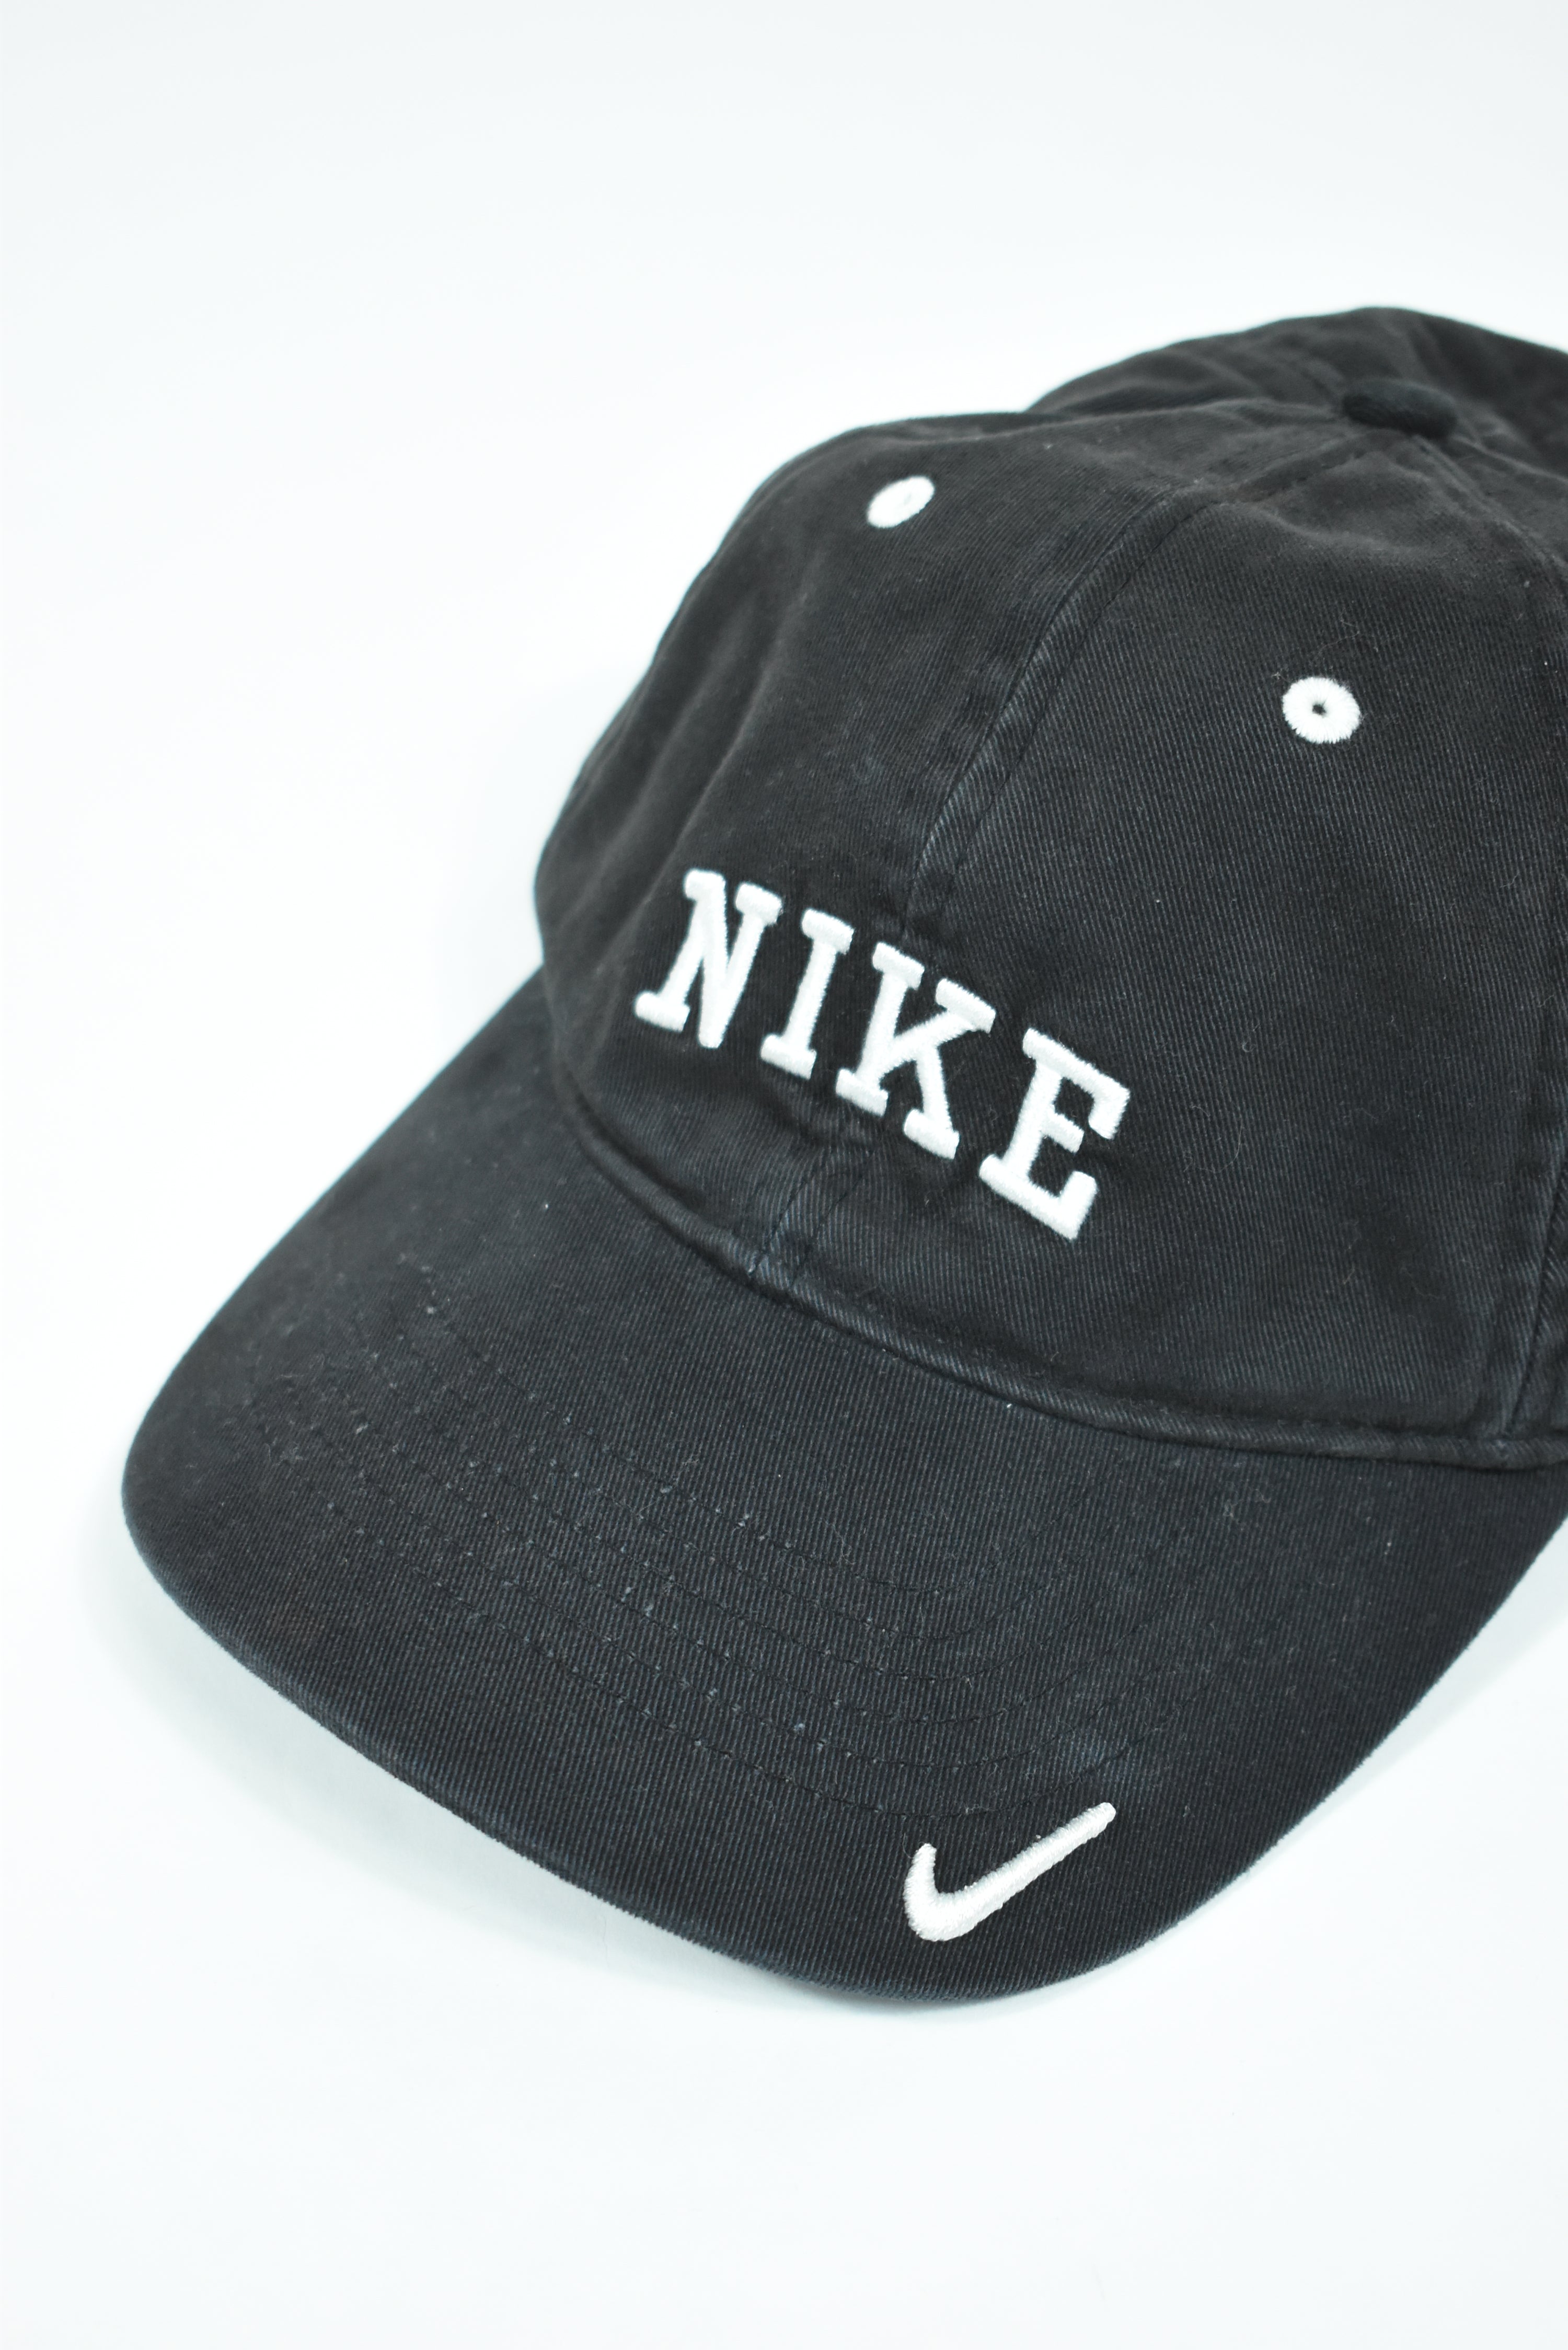 Vintage Nike Embroidery Spellout Cap OS